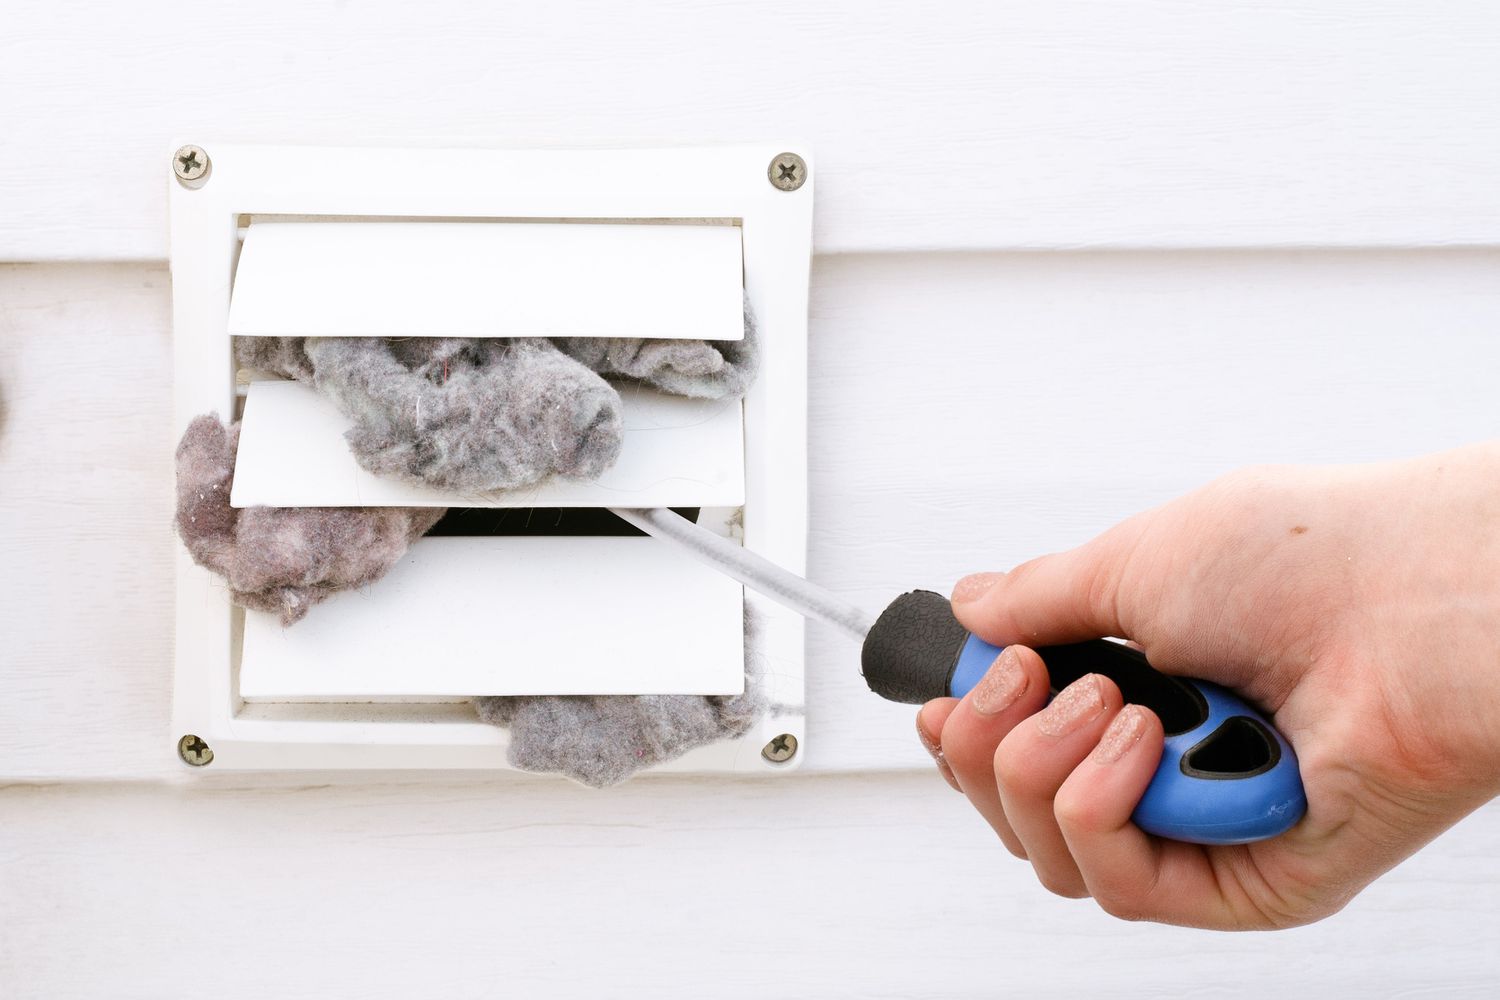 How To Clean Outside Dryer Vent